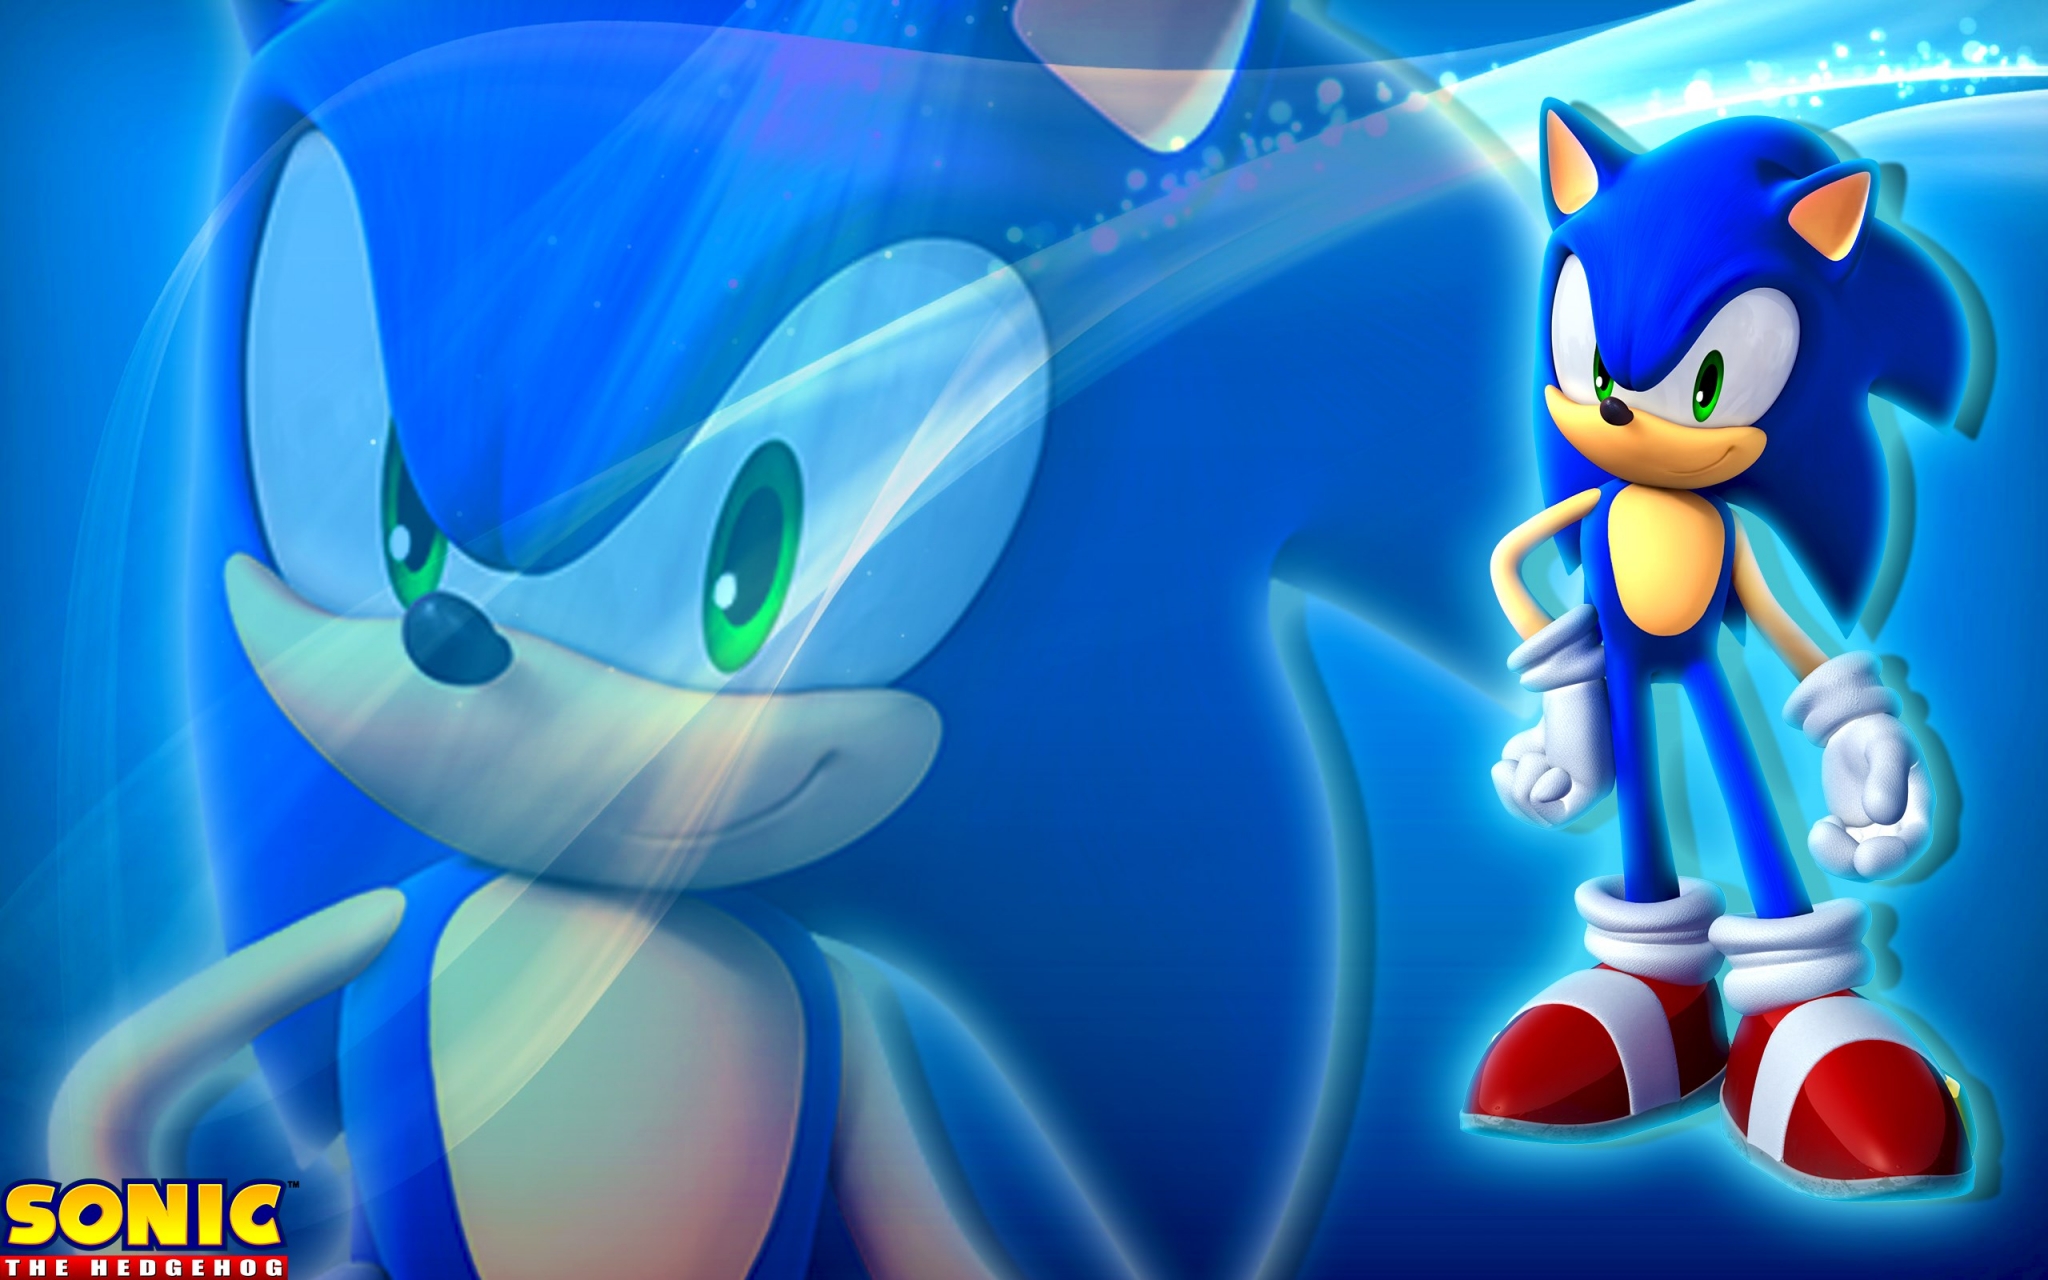 Sonic wallpaper full hd p k k hd wallpapers backgrounds free download rare gallery